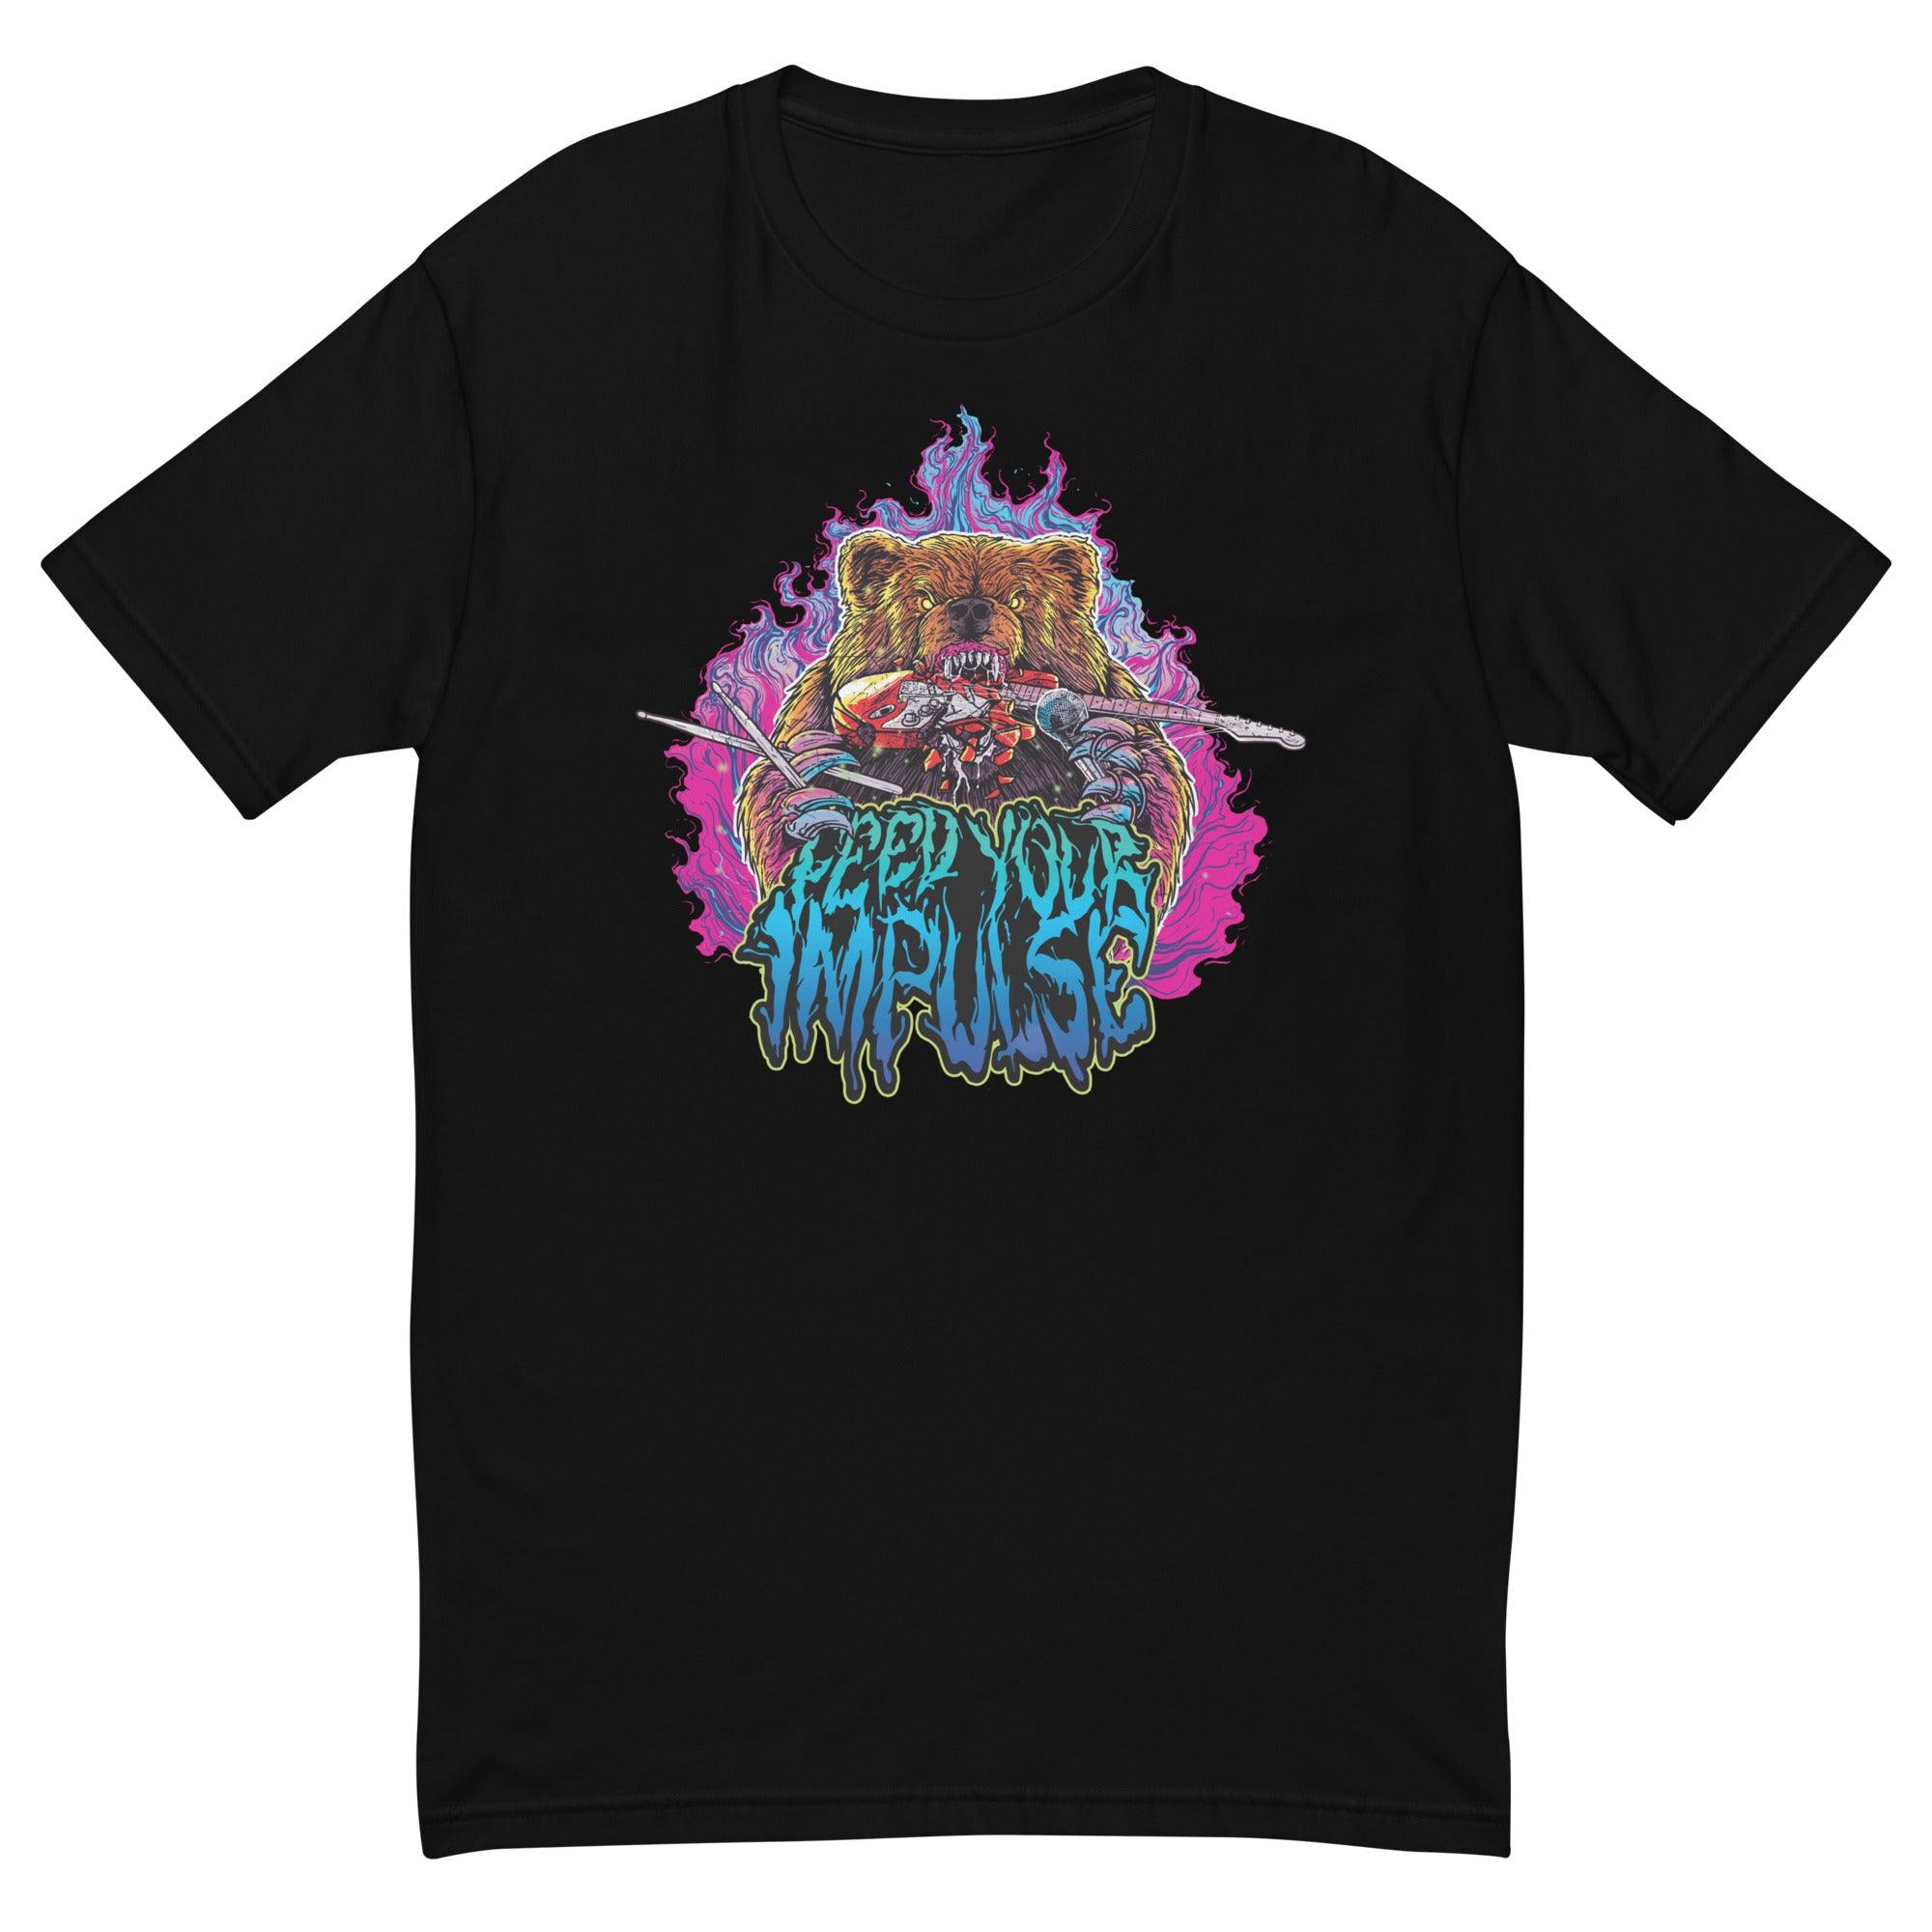 Feed Your Impulse Grizzly Shirt - Impulse Music Co.